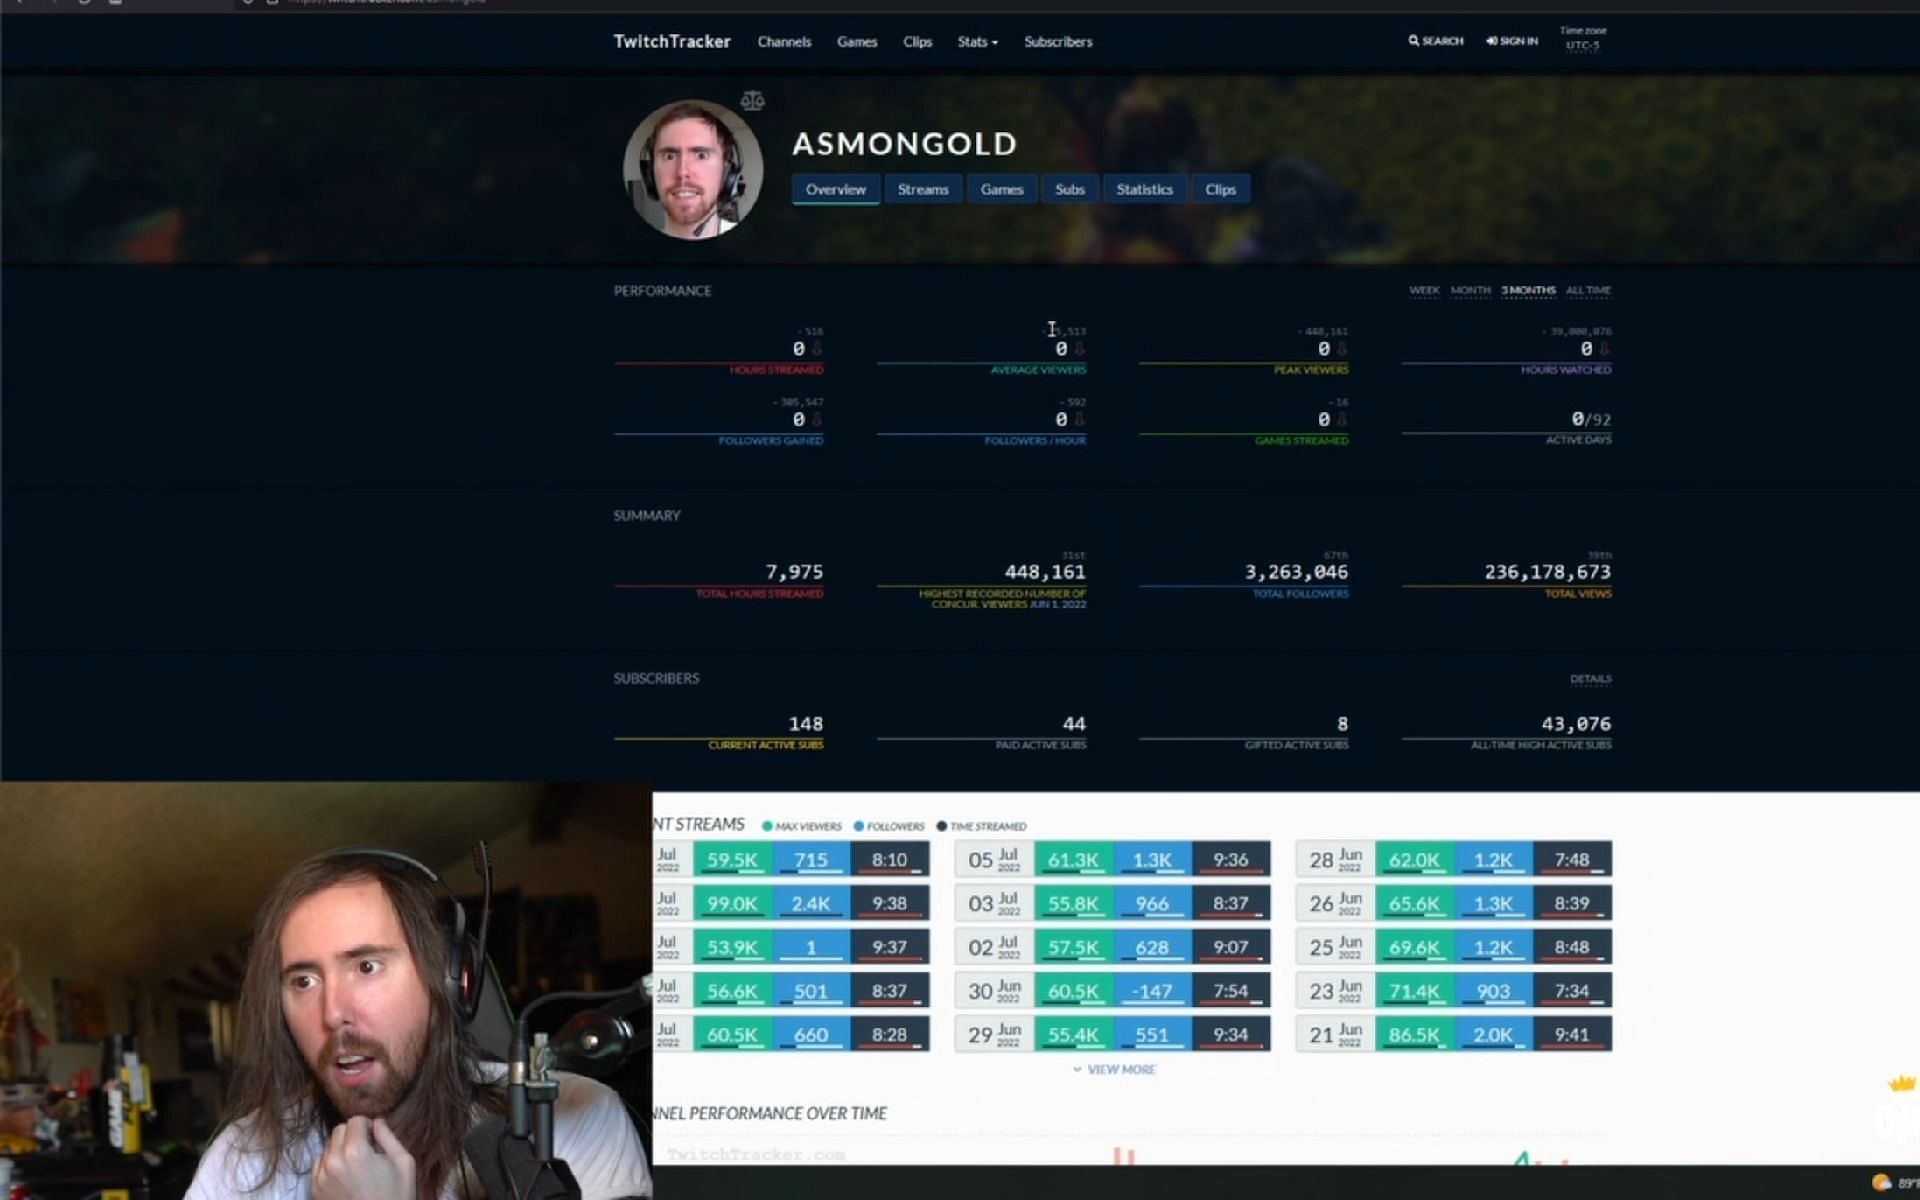 Asmongold reviews his main Twitch channel